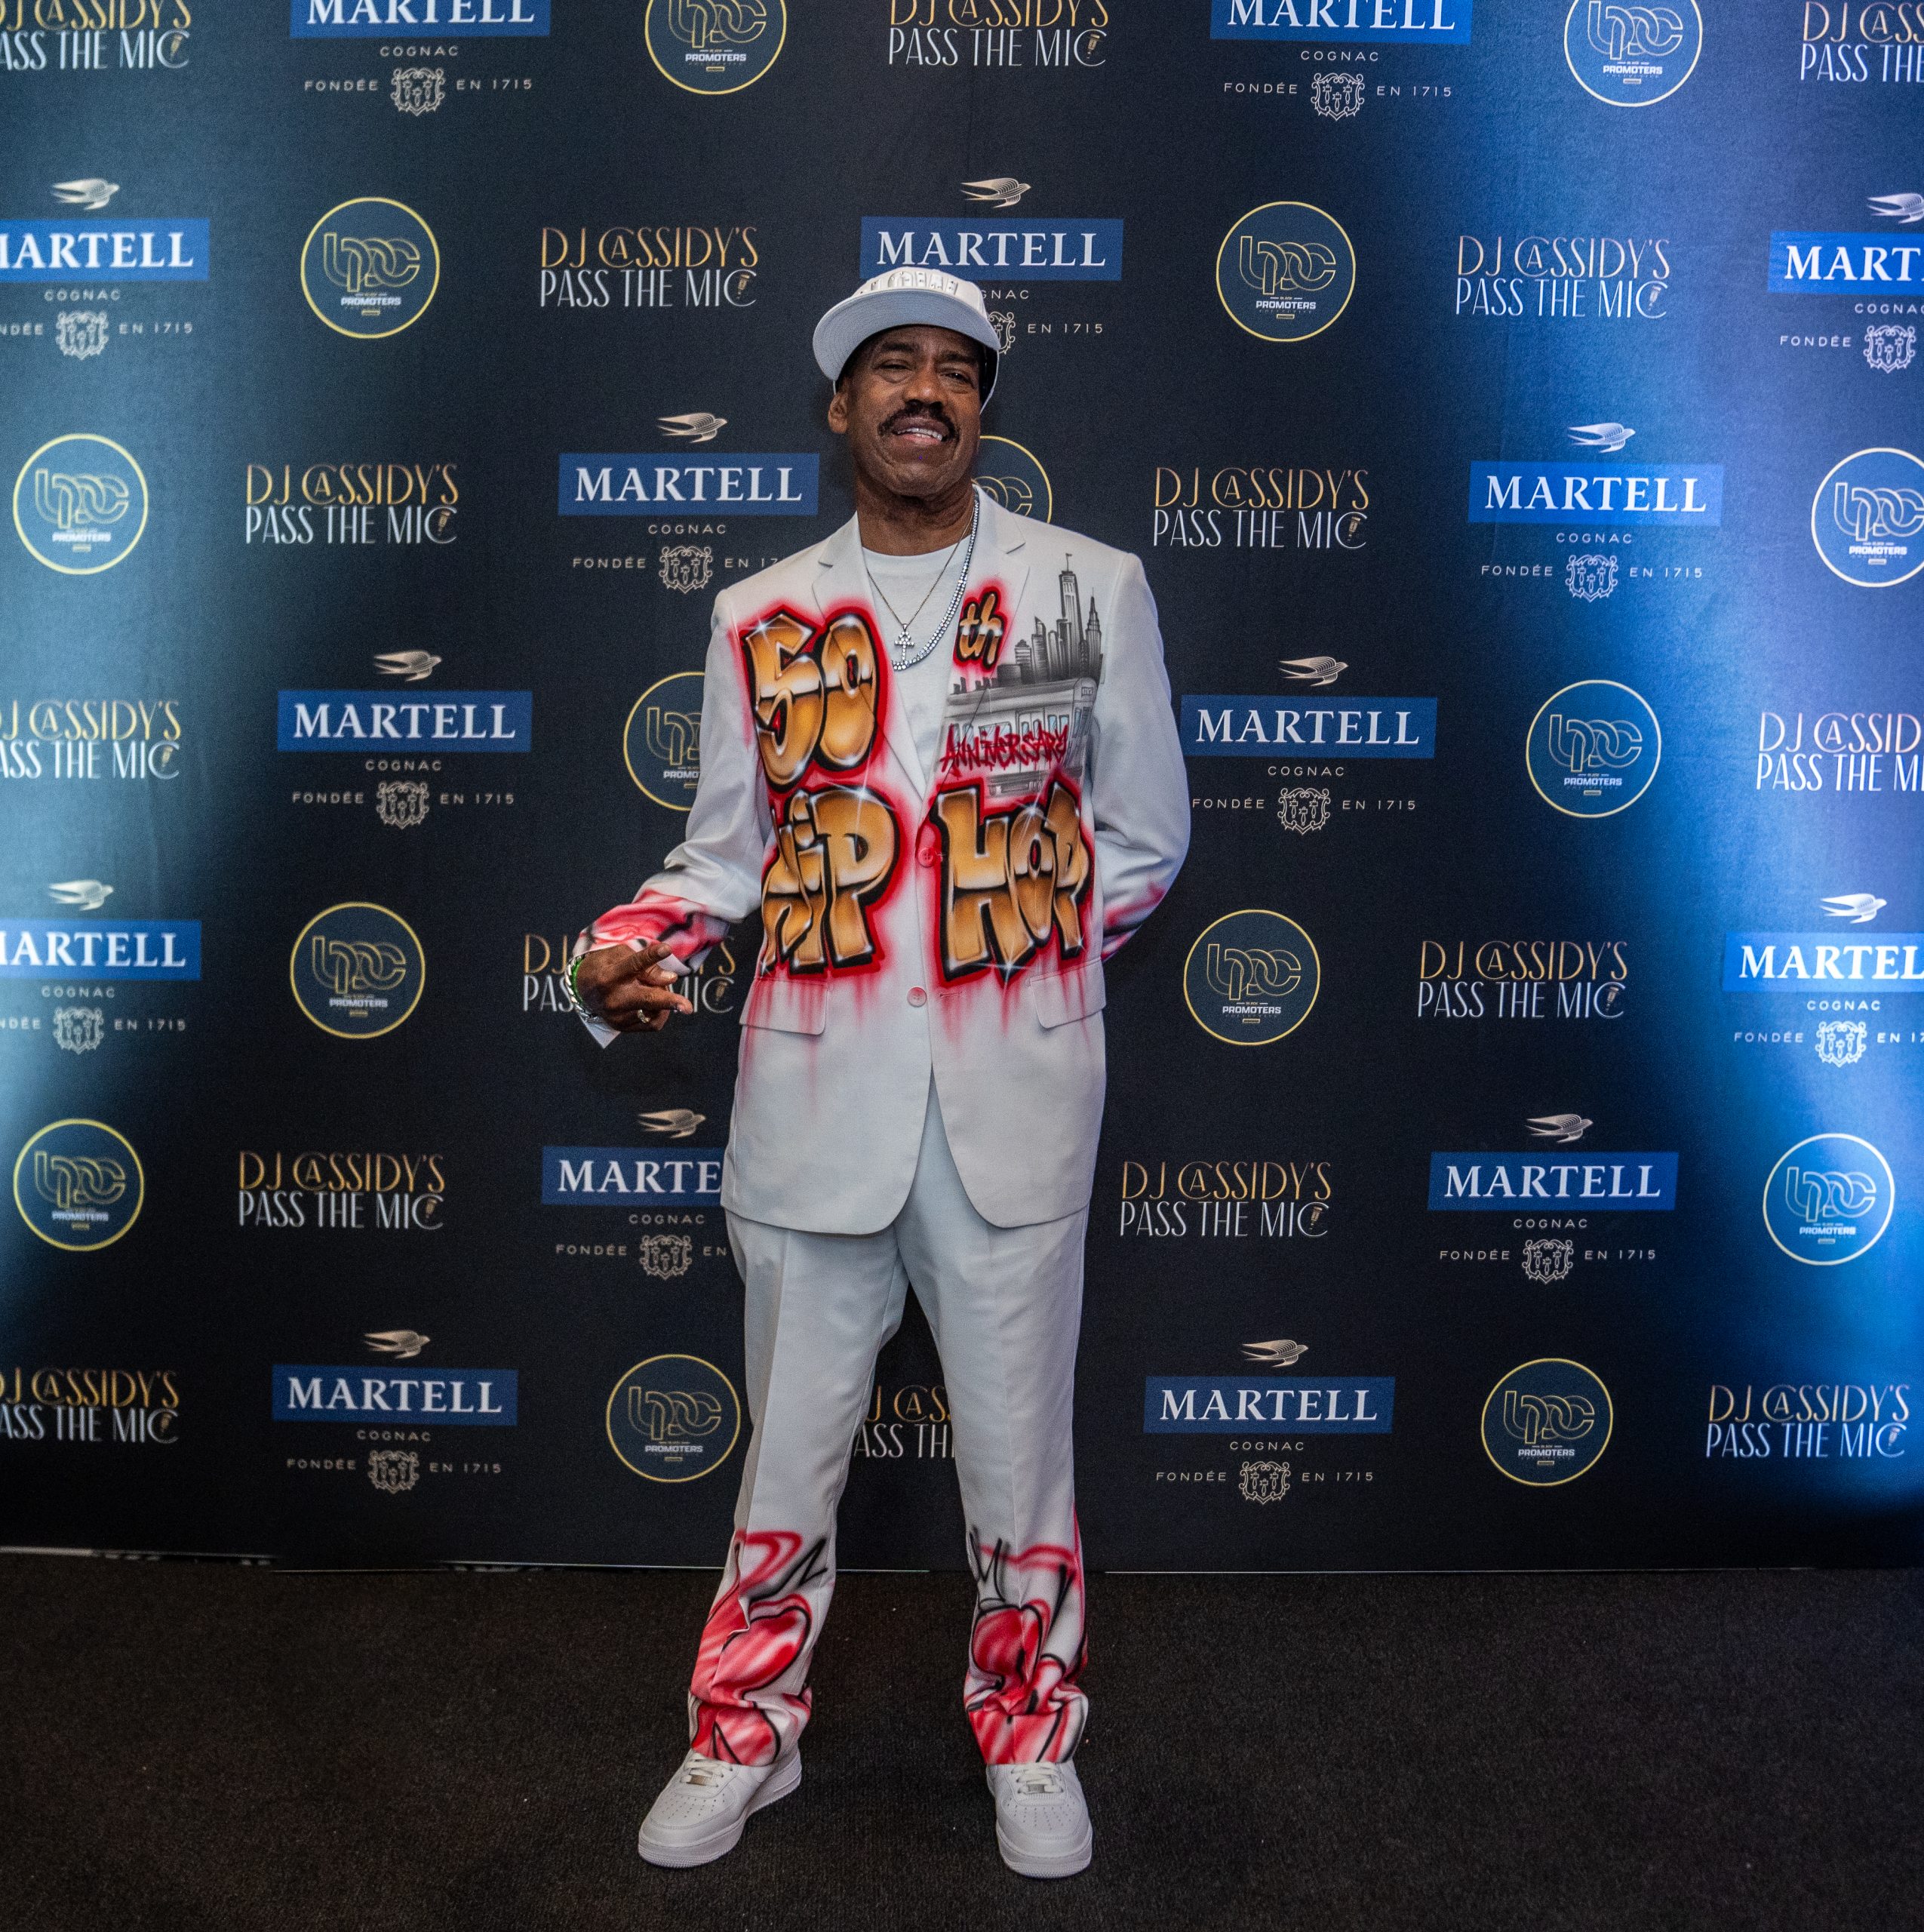 Kurtis Blow - Martell Cognac, The Black Promoters Collective, and Power 105.1 present DJ Cassidy's Pass The Mic LIVE at Radio City Music Hall in NYC